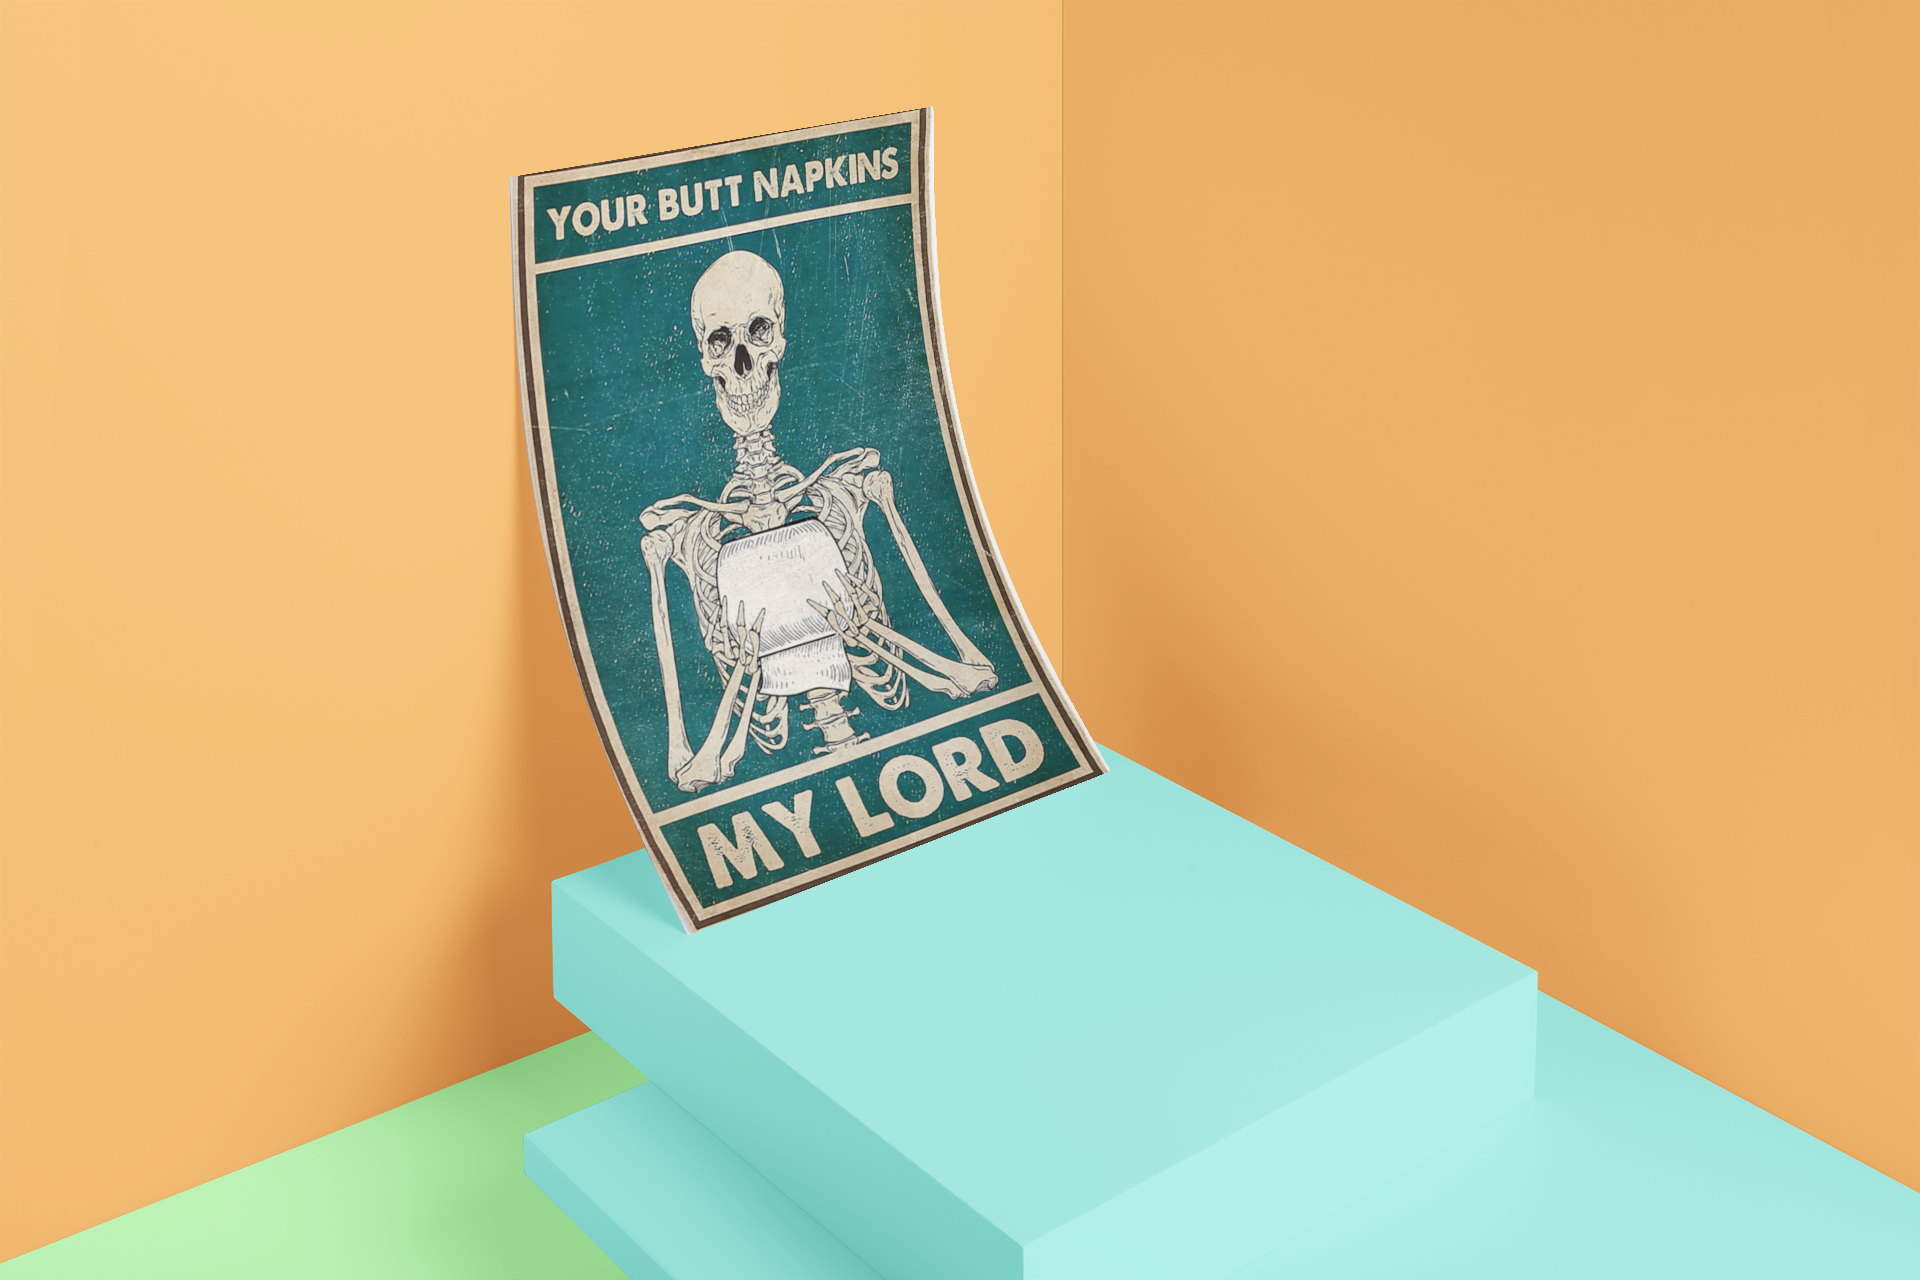 Skeleton your butt napkins my love poster 3